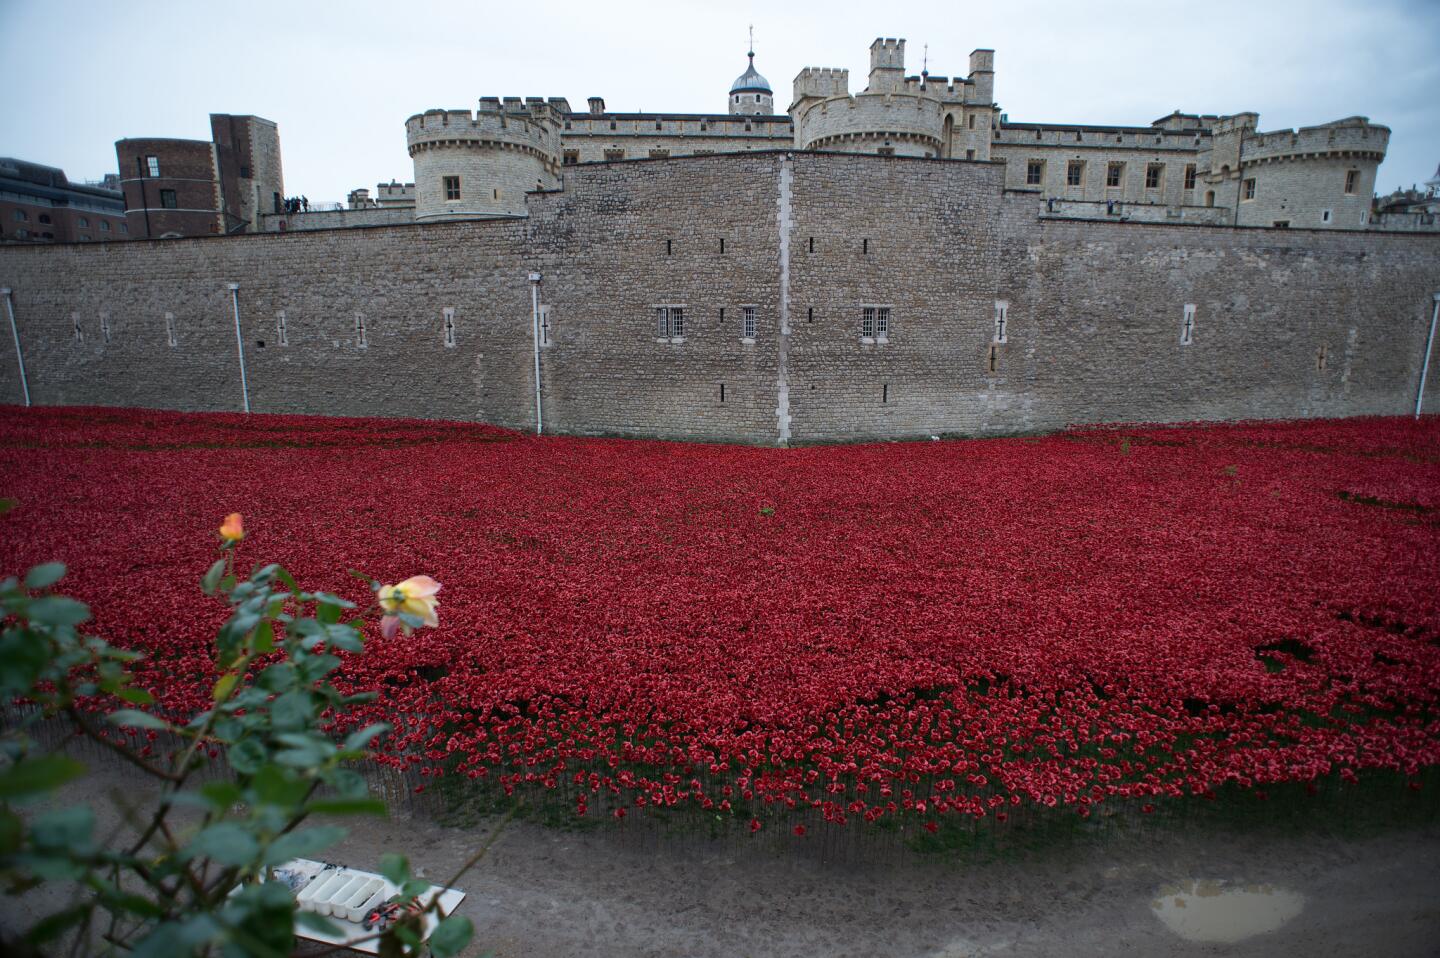 "Blood Swept Lands and Seas of Red" began Aug. 5. The moat of the Tower of London as of Sunday has filled with ceramic poppies to mark the 100th anniversary of the outbreak of World War I.